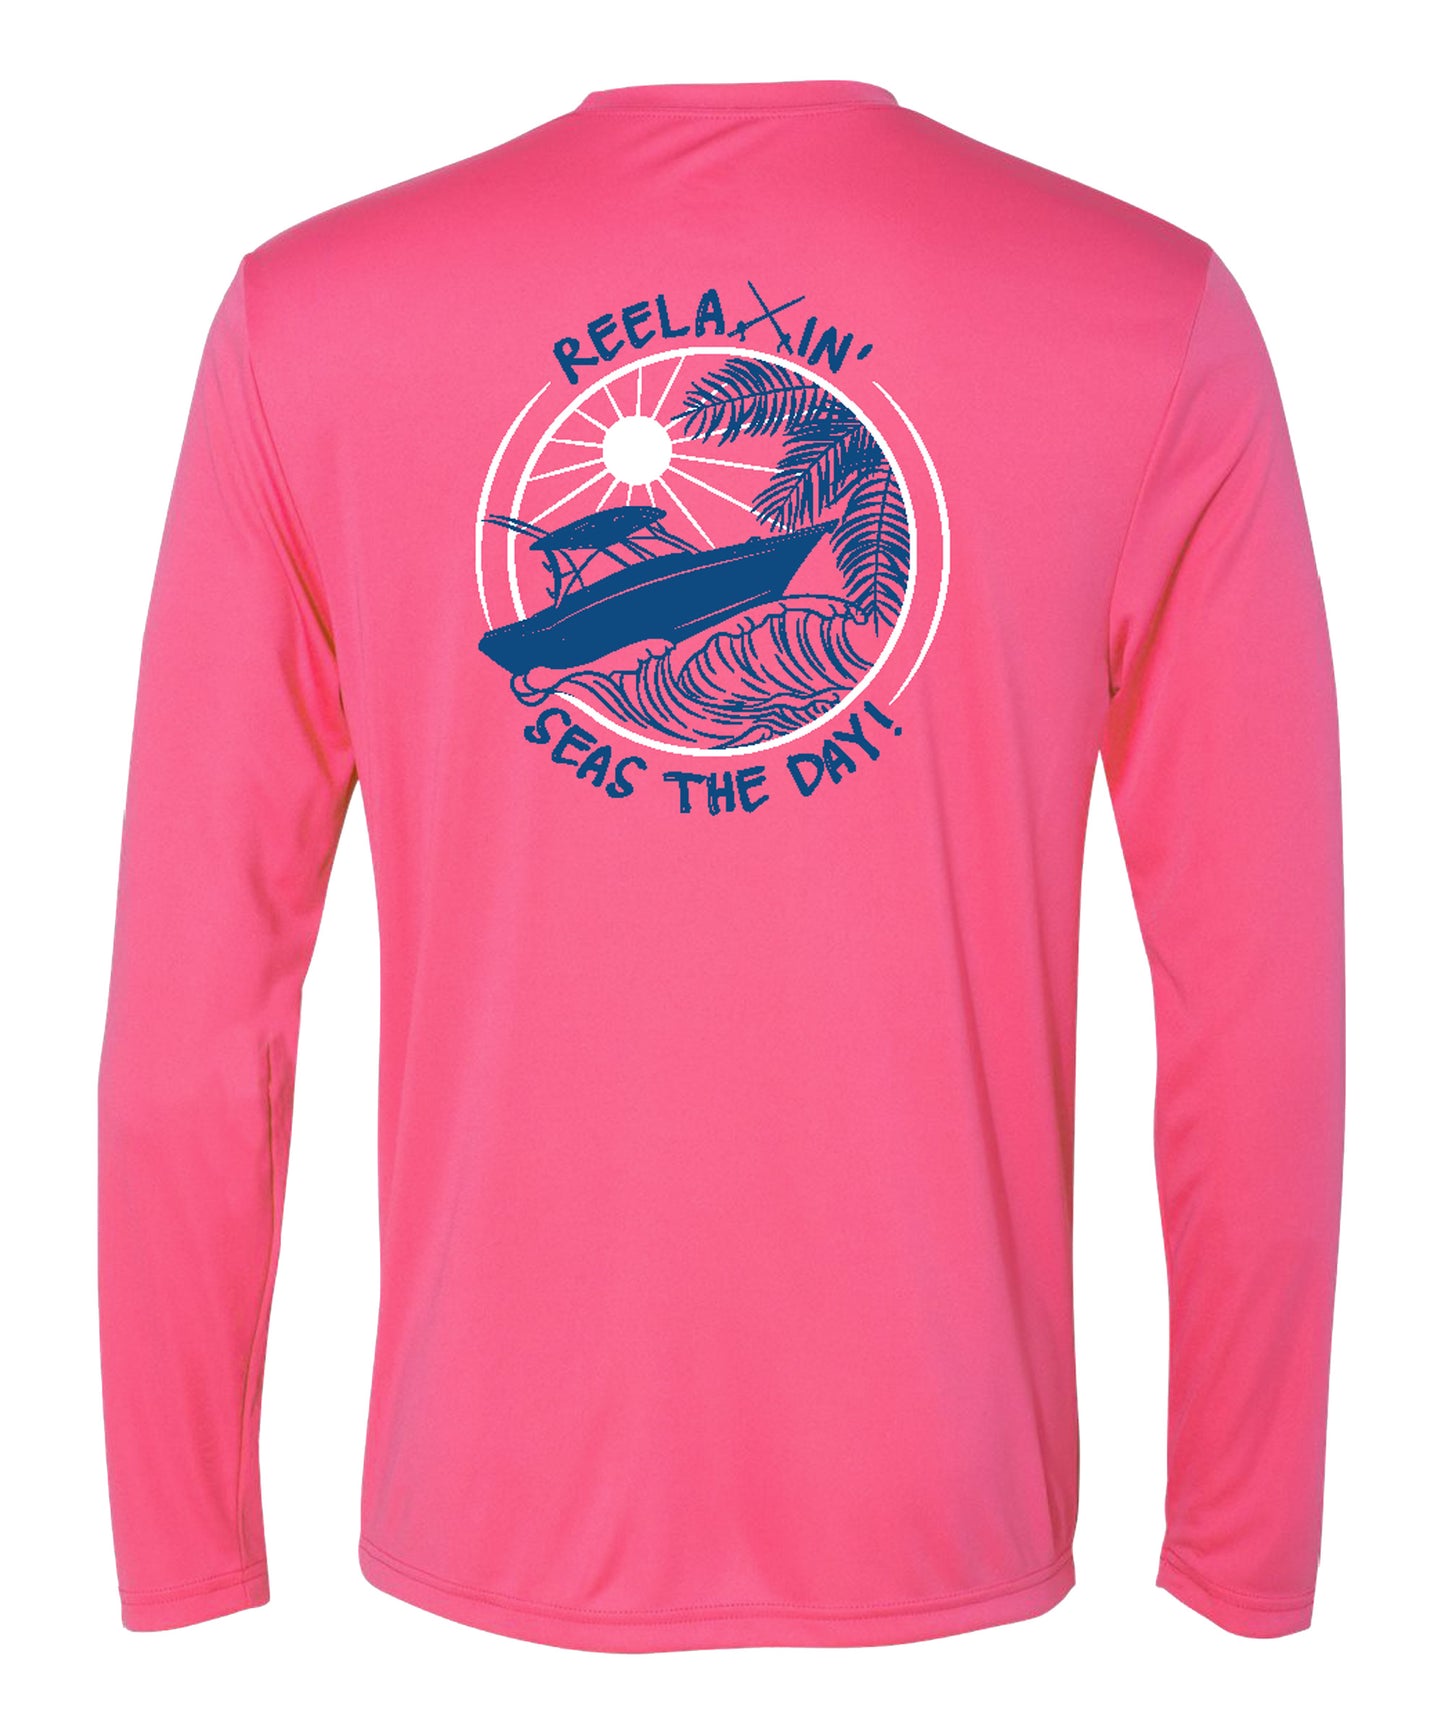 Pink Reelaxin' Performance Dry-Fit Fishing Long Sleeve Shirts, 50+ UPF Sun Protection  - Reel Fishy Apparel